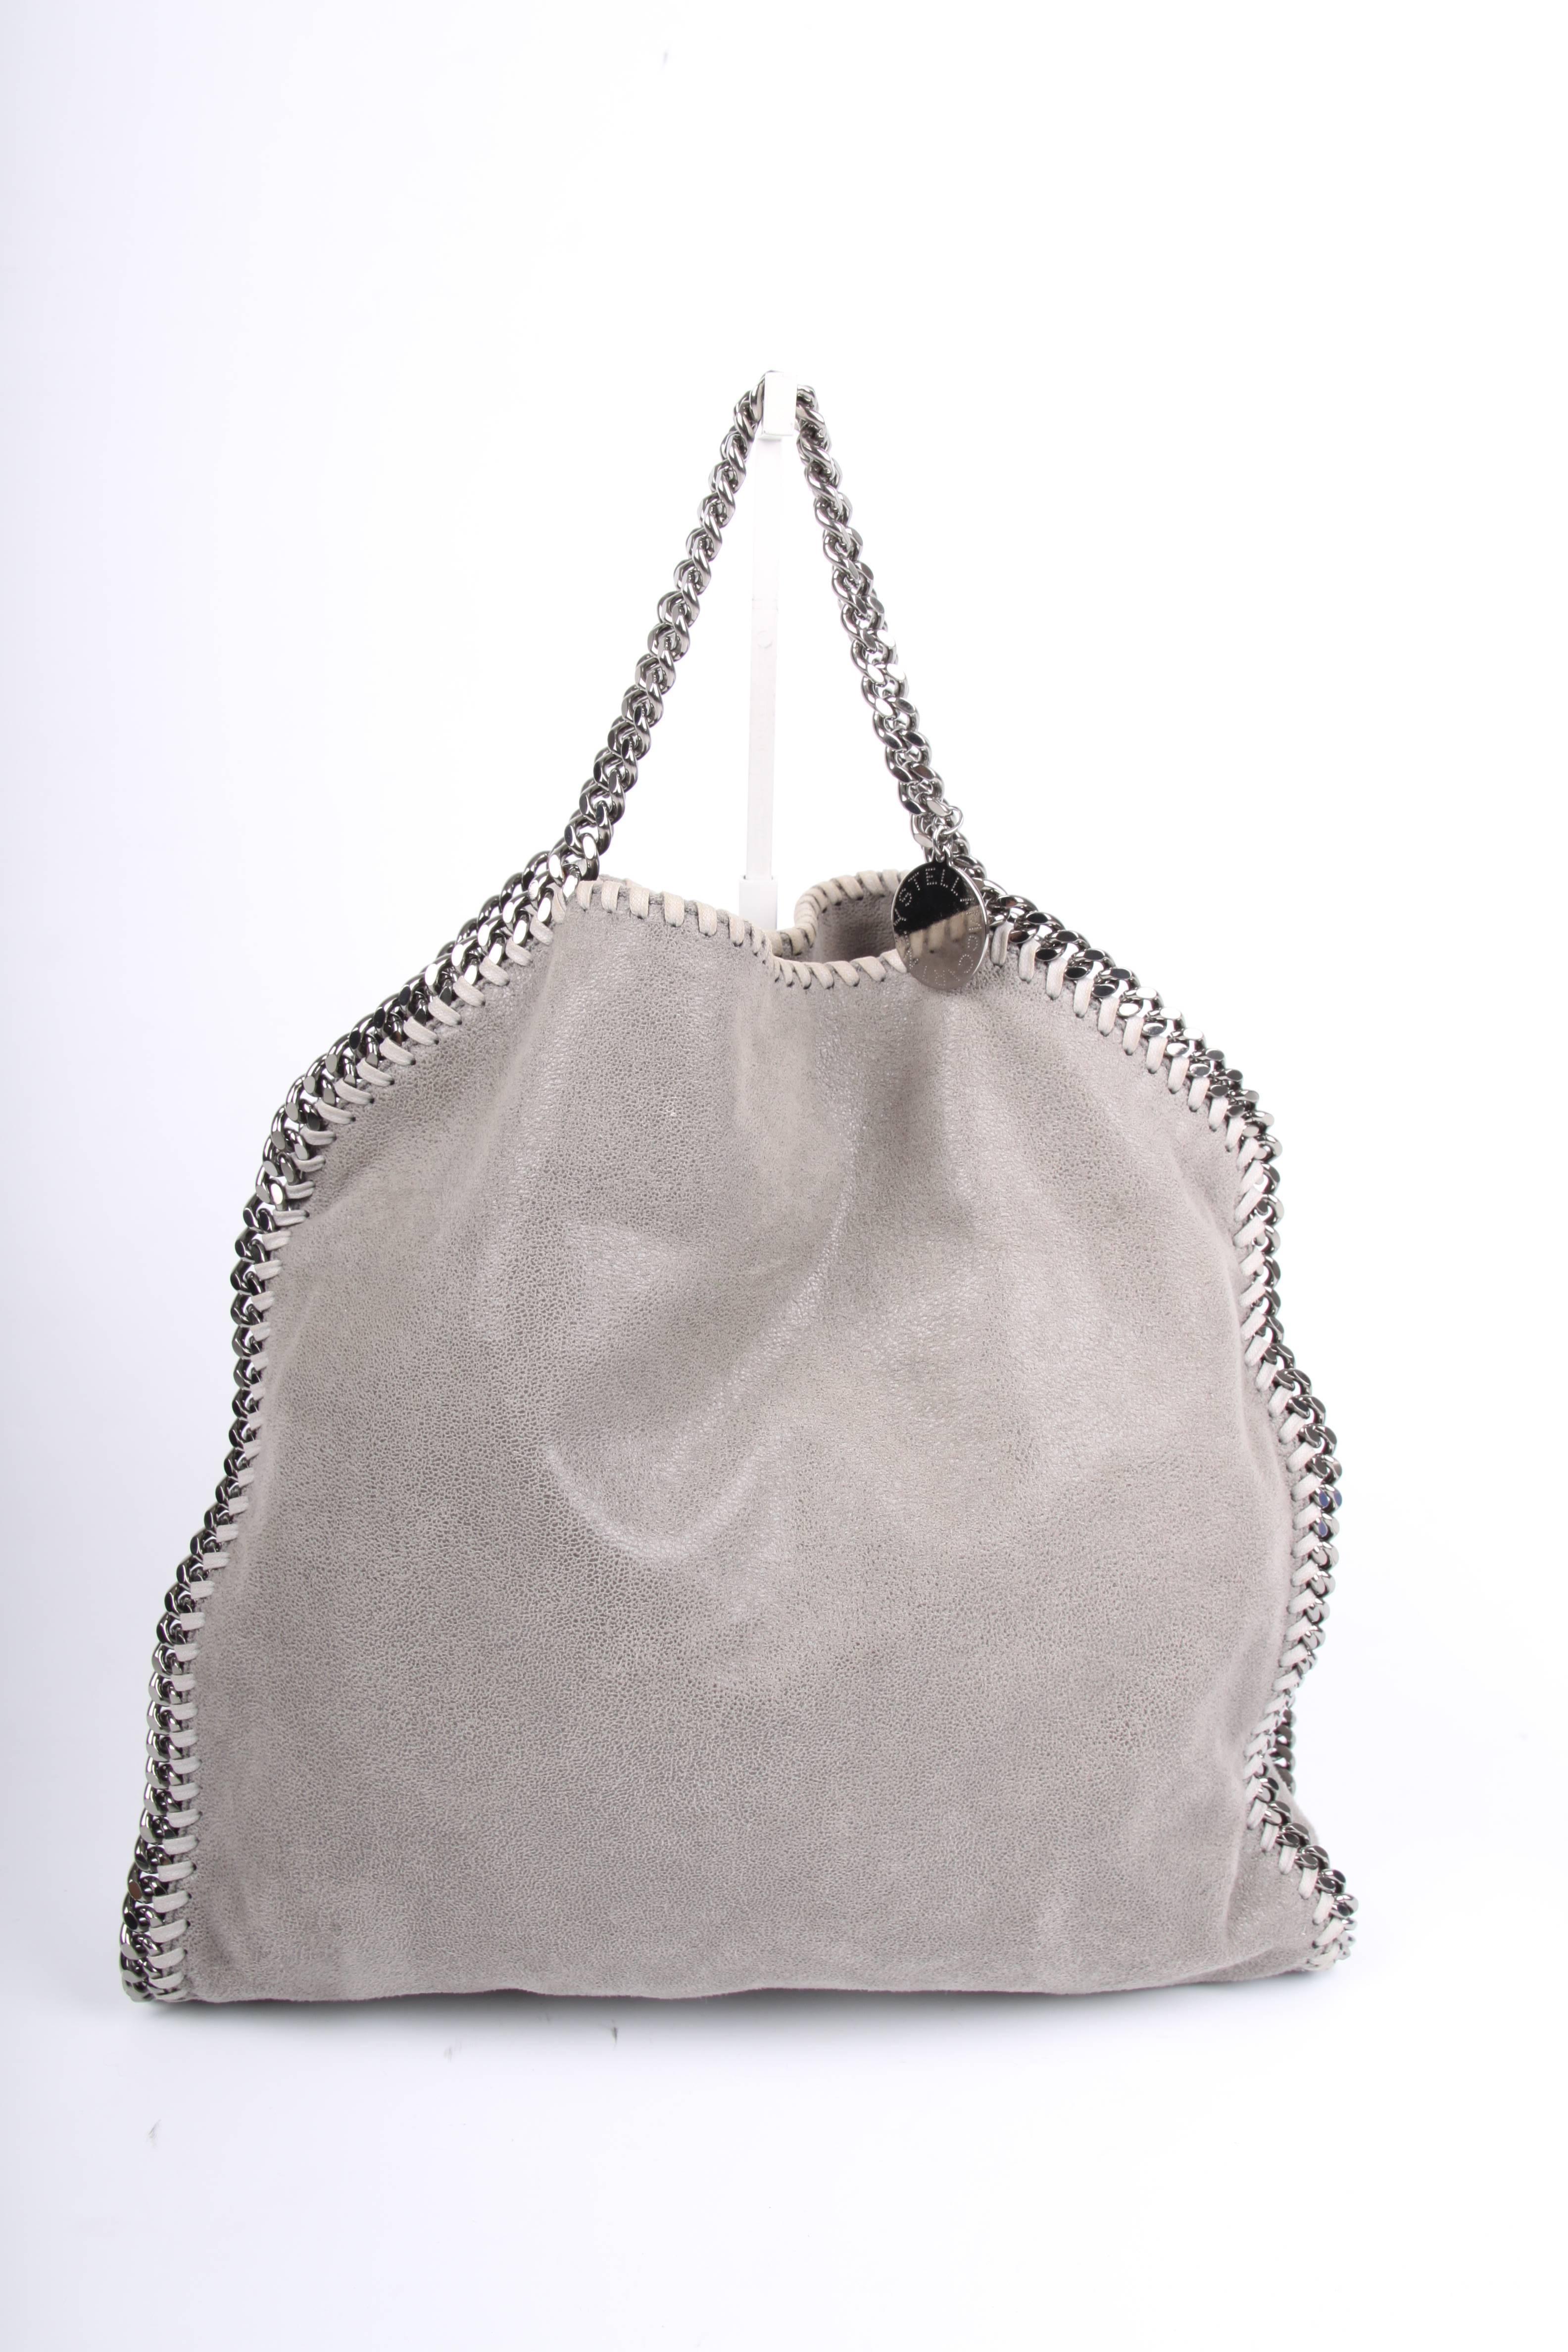 Stella McCartney is known for her use of animal friendly and durable materials. Go Stella!

This Falabella Shaggy Deer Bag is made of 100% polyester, but looks like soft and supple leather. Executed in a light grey color and embellished with